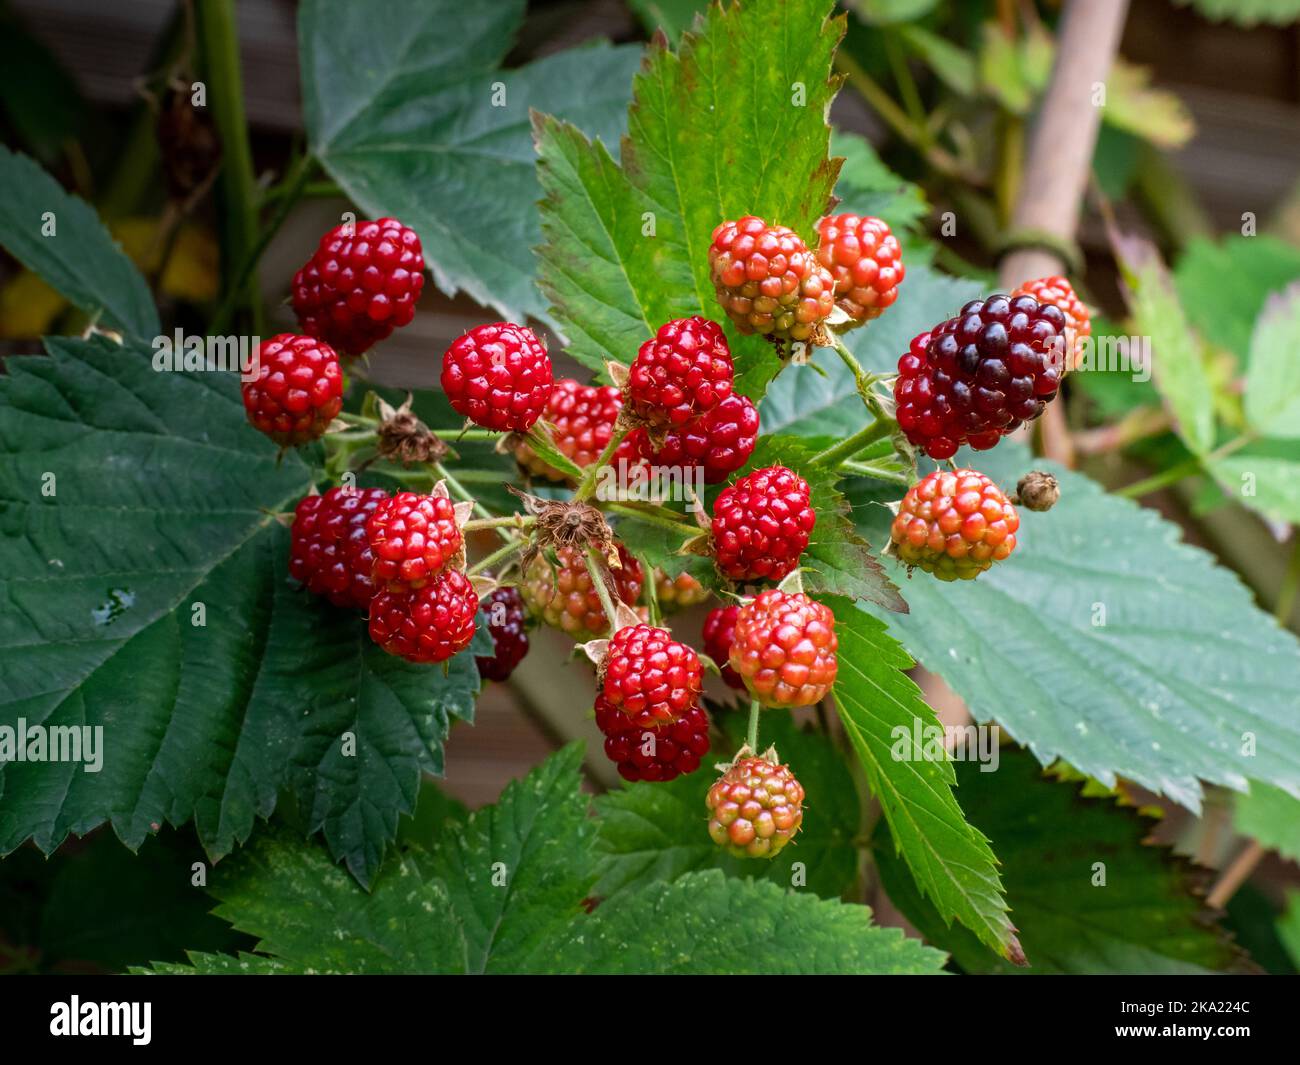 Unripe blackberries on a bush. Red colored fruits growing in the nature. Close-up of the plant in a garden environment in Germany. Organic vegan food. Stock Photo